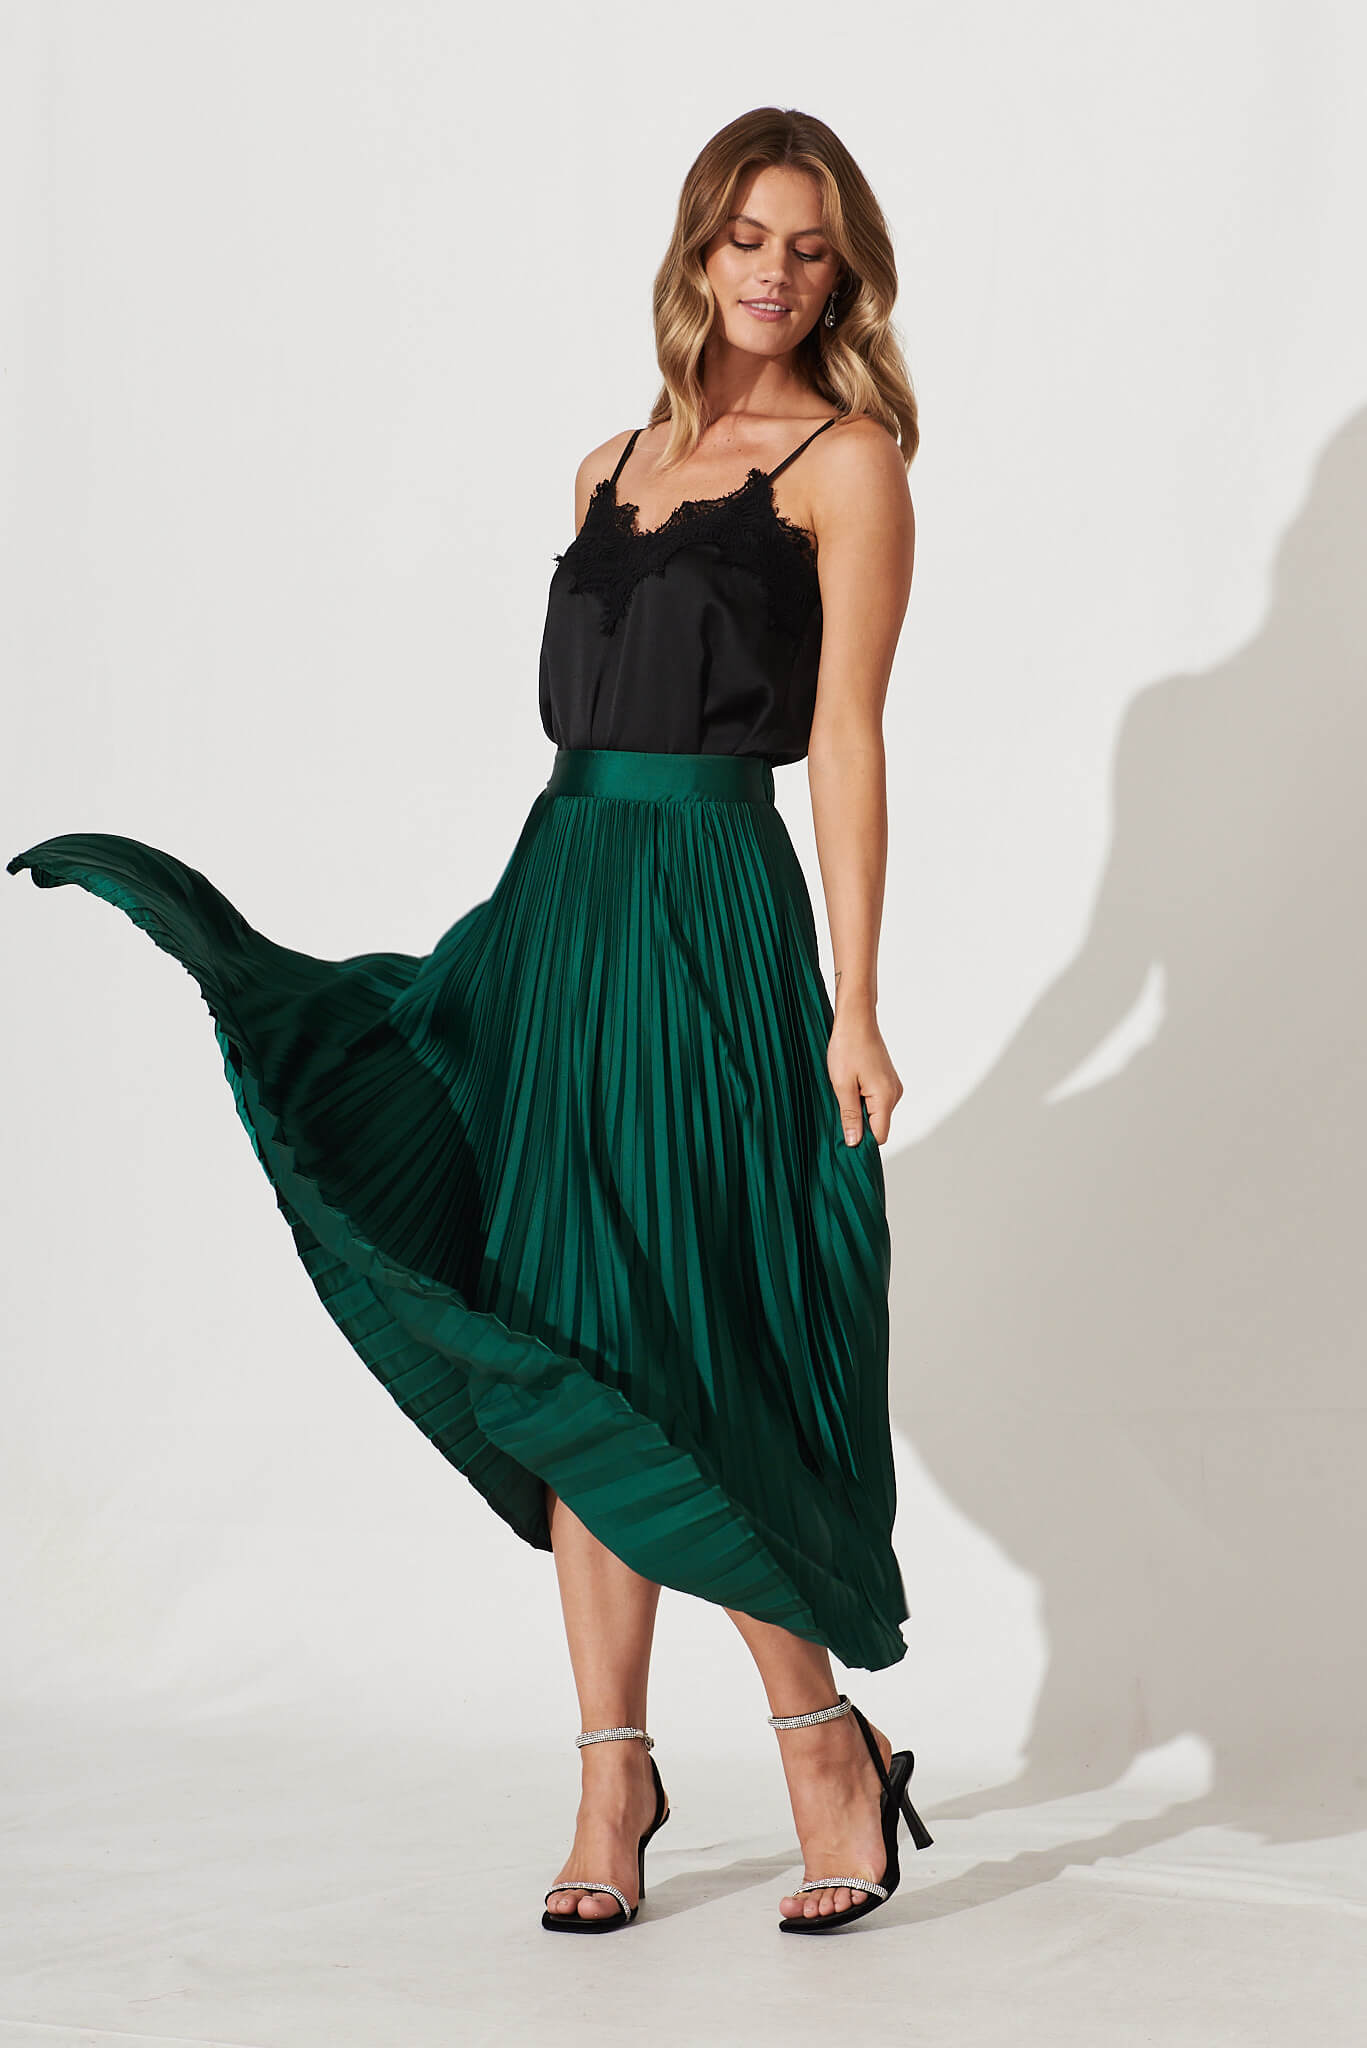 Discover more than 139 green pleated skirt super hot